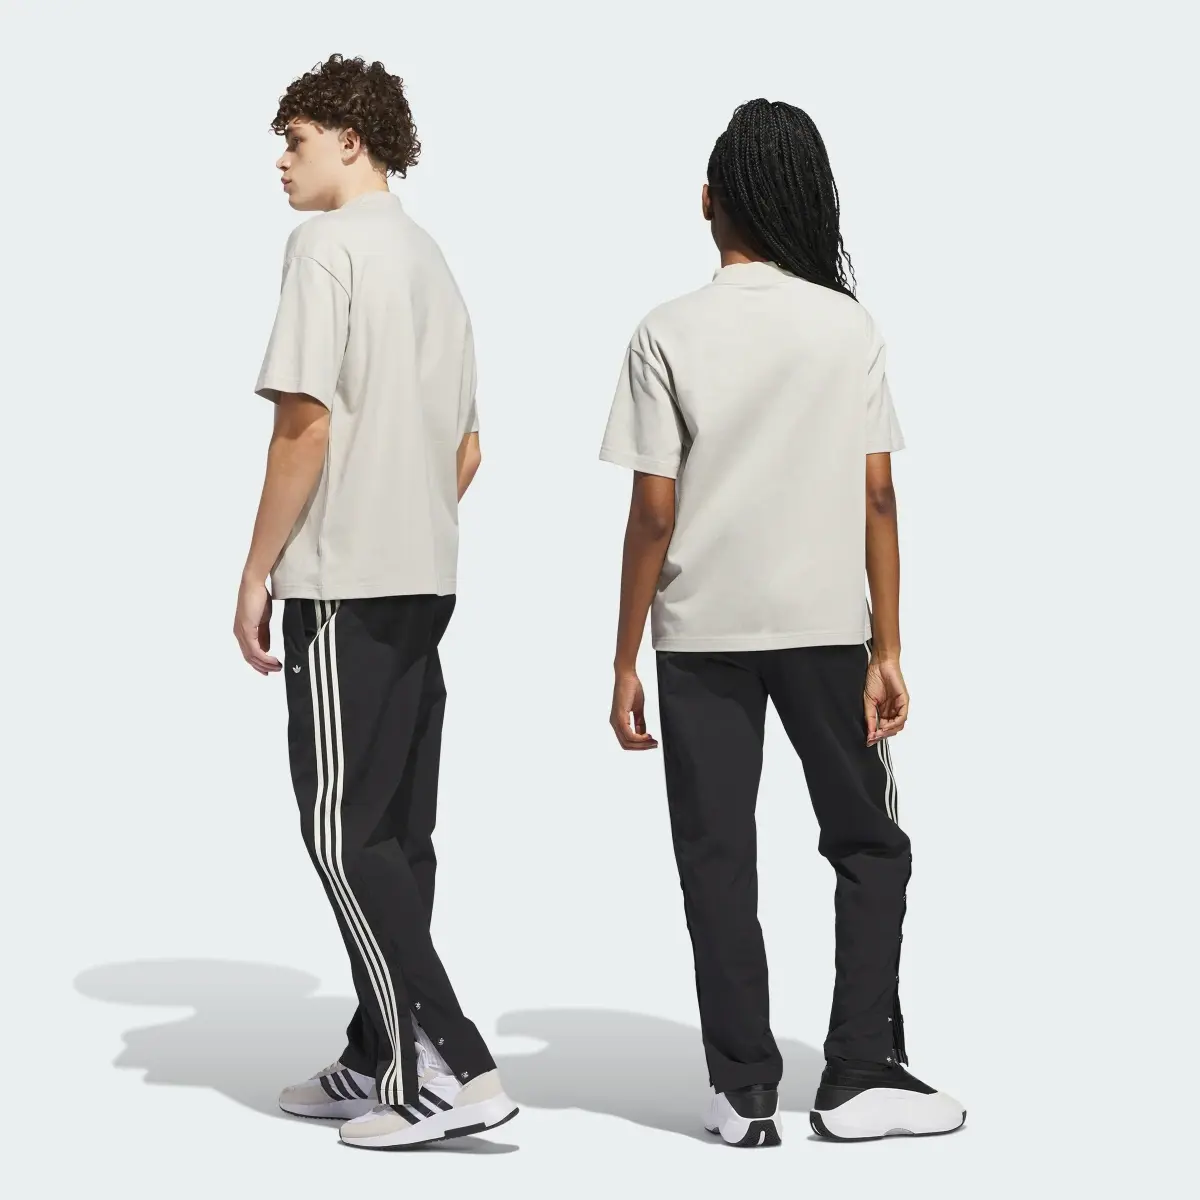 Adidas Basketball Track Suit Pants (Gender Neutral). 2